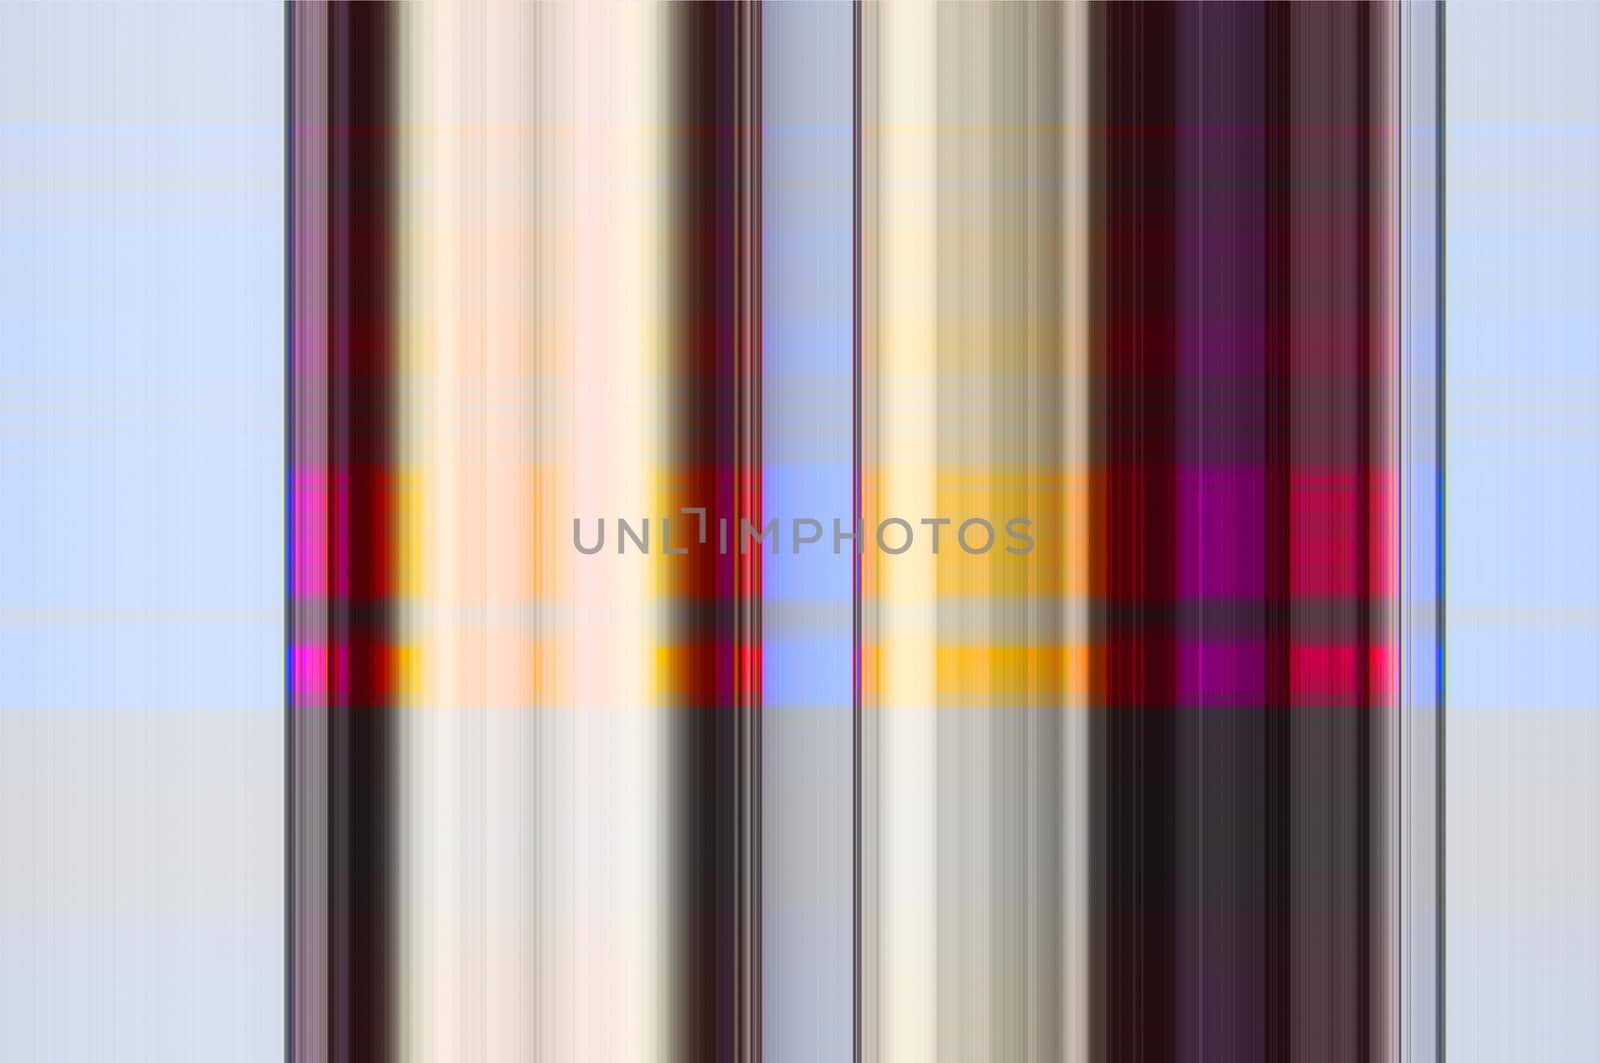 Vertical violet, orange, yellow, pink lines, abstract background with effect by Bezdnatm